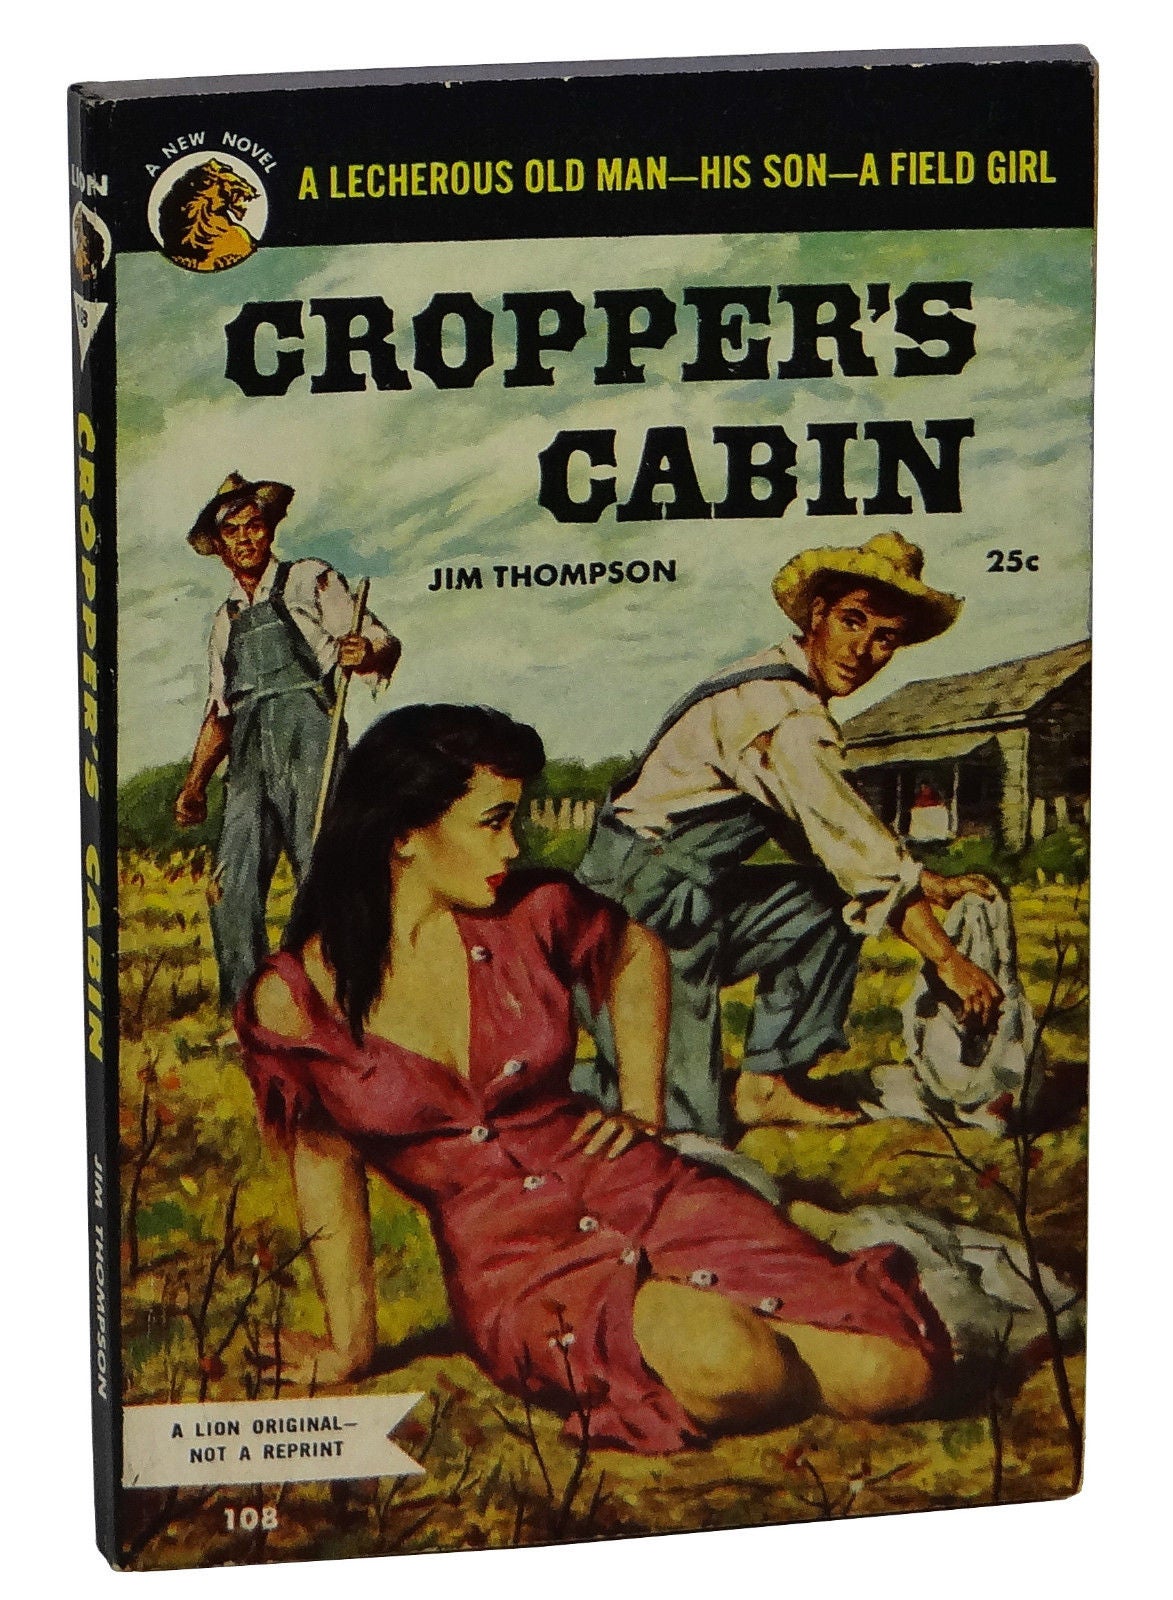 Cropper's　First　Cabin　Jim　Thompson　Edition